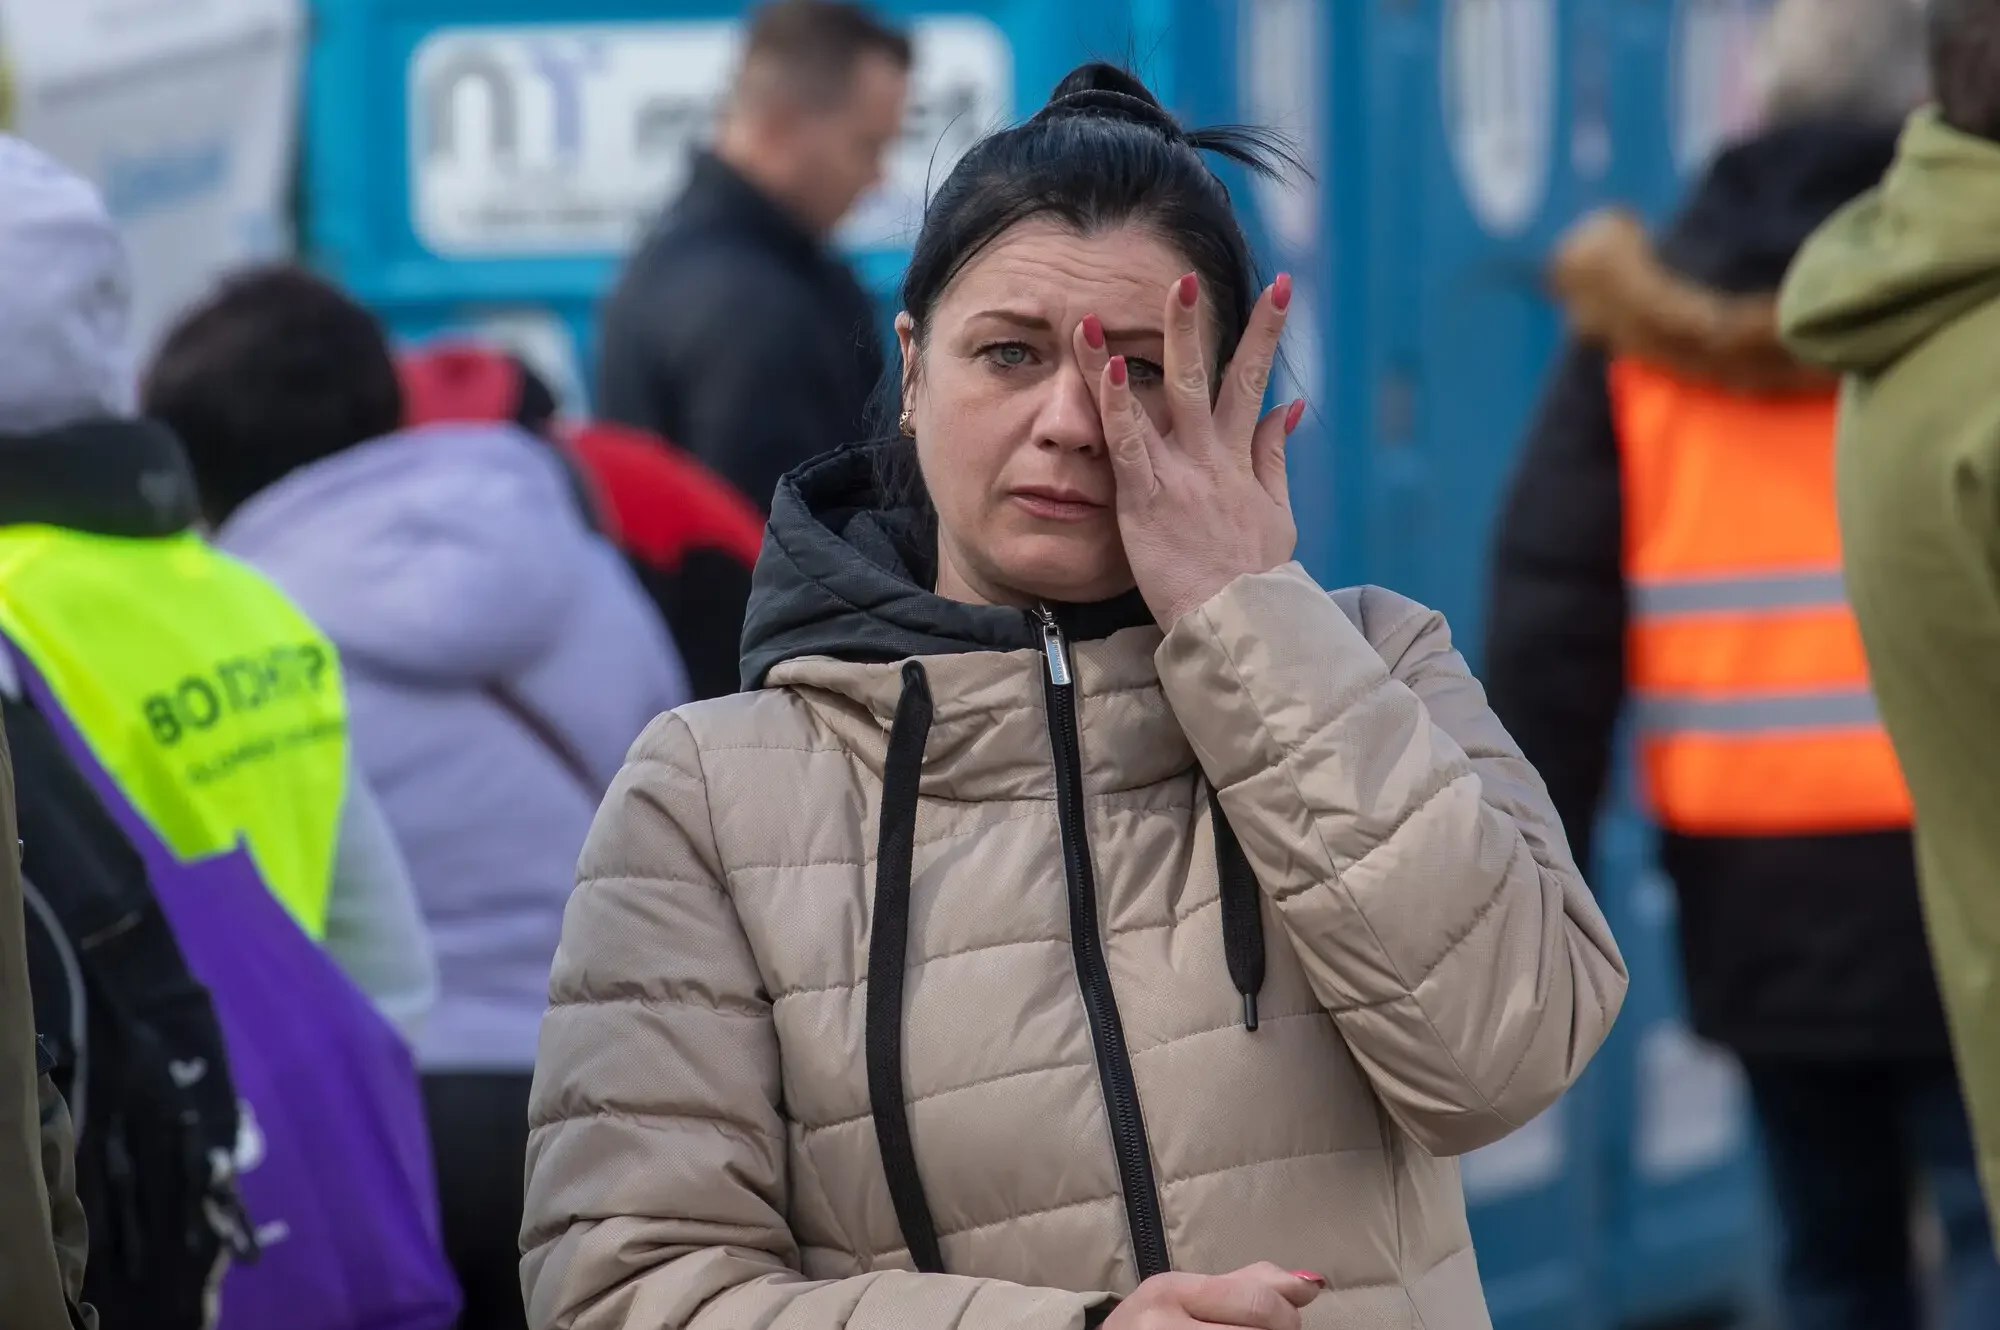 Ukrainian Tatiana Medzatova waits at the Medyka, Poland border crossing point, for her two children, one adult and one teenager, to arrive from Ukraine. Przemysl is a crossing point set up for refugees crossing on foot. Tatiana had just received a call that her family was only an hour away.